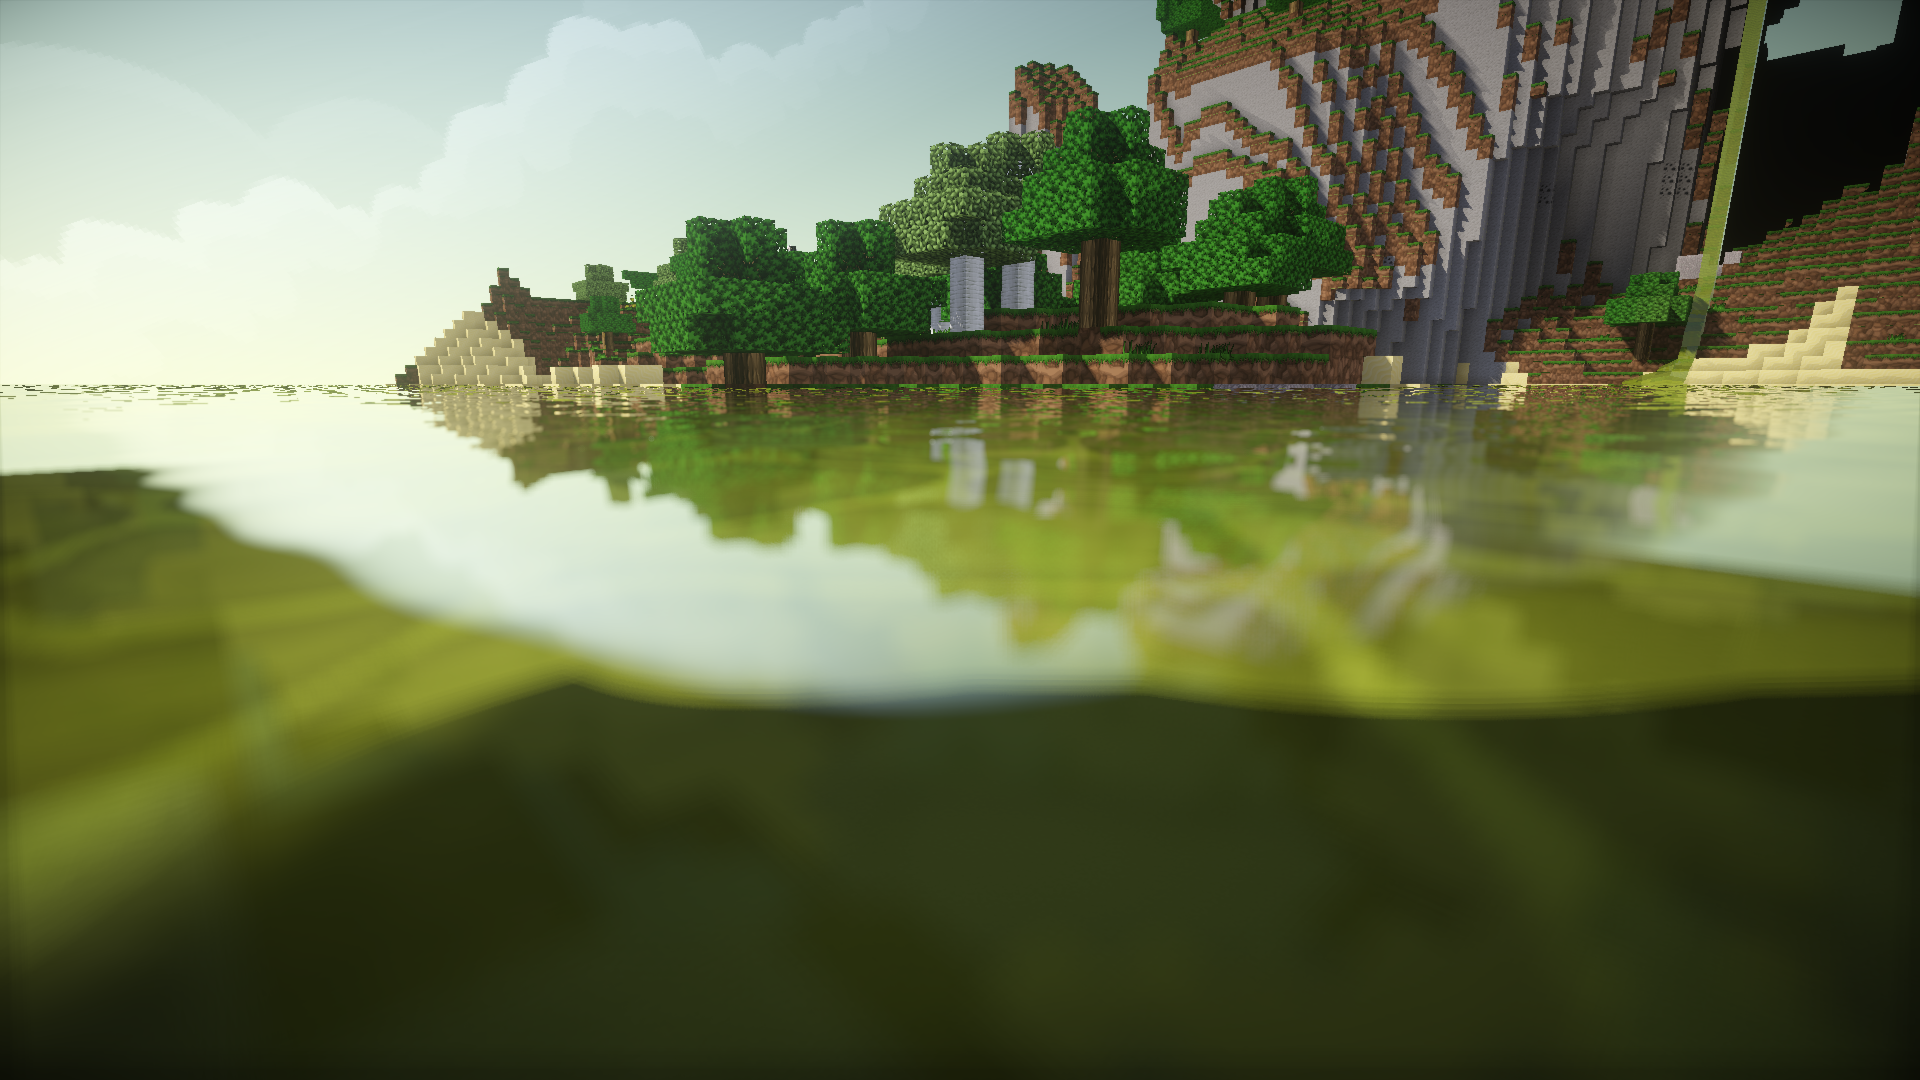 Free download Minecraft World Wallpaper Hintergrnde 1920x1080 ID488041 [1920x1080] for your Desktop, Mobile & Tablet. Explore Minecraft World Wallpaper. Minecraft Animated Wallpaper, 3D Minecraft Wallpaper, Minecraft Live Wallpaper Download